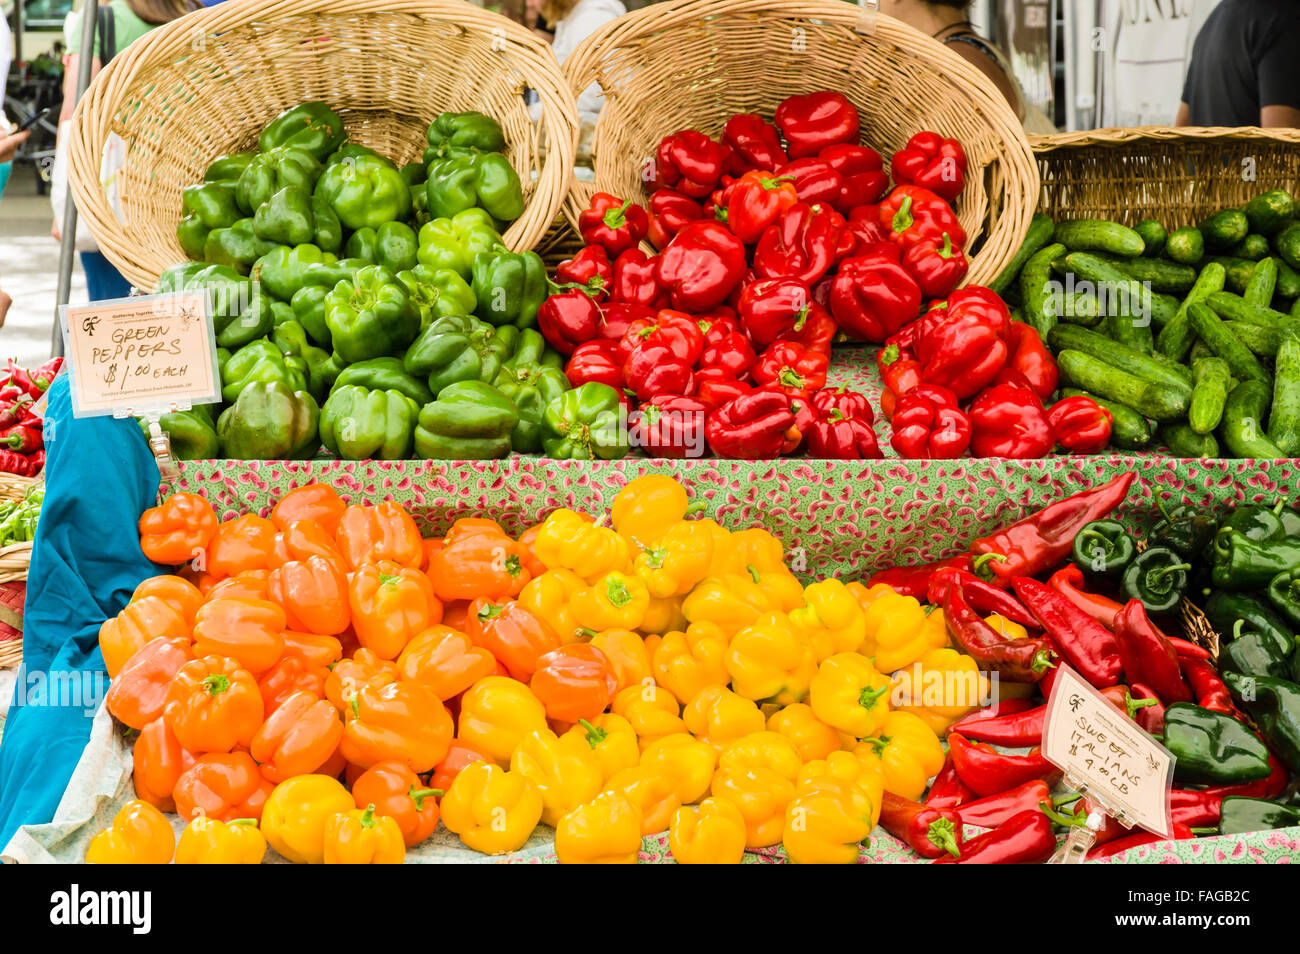 Display of colorful bell peppers including red, orange, yellow and green at a farmers market in Beaverton, Oregon, USA Stock Photo